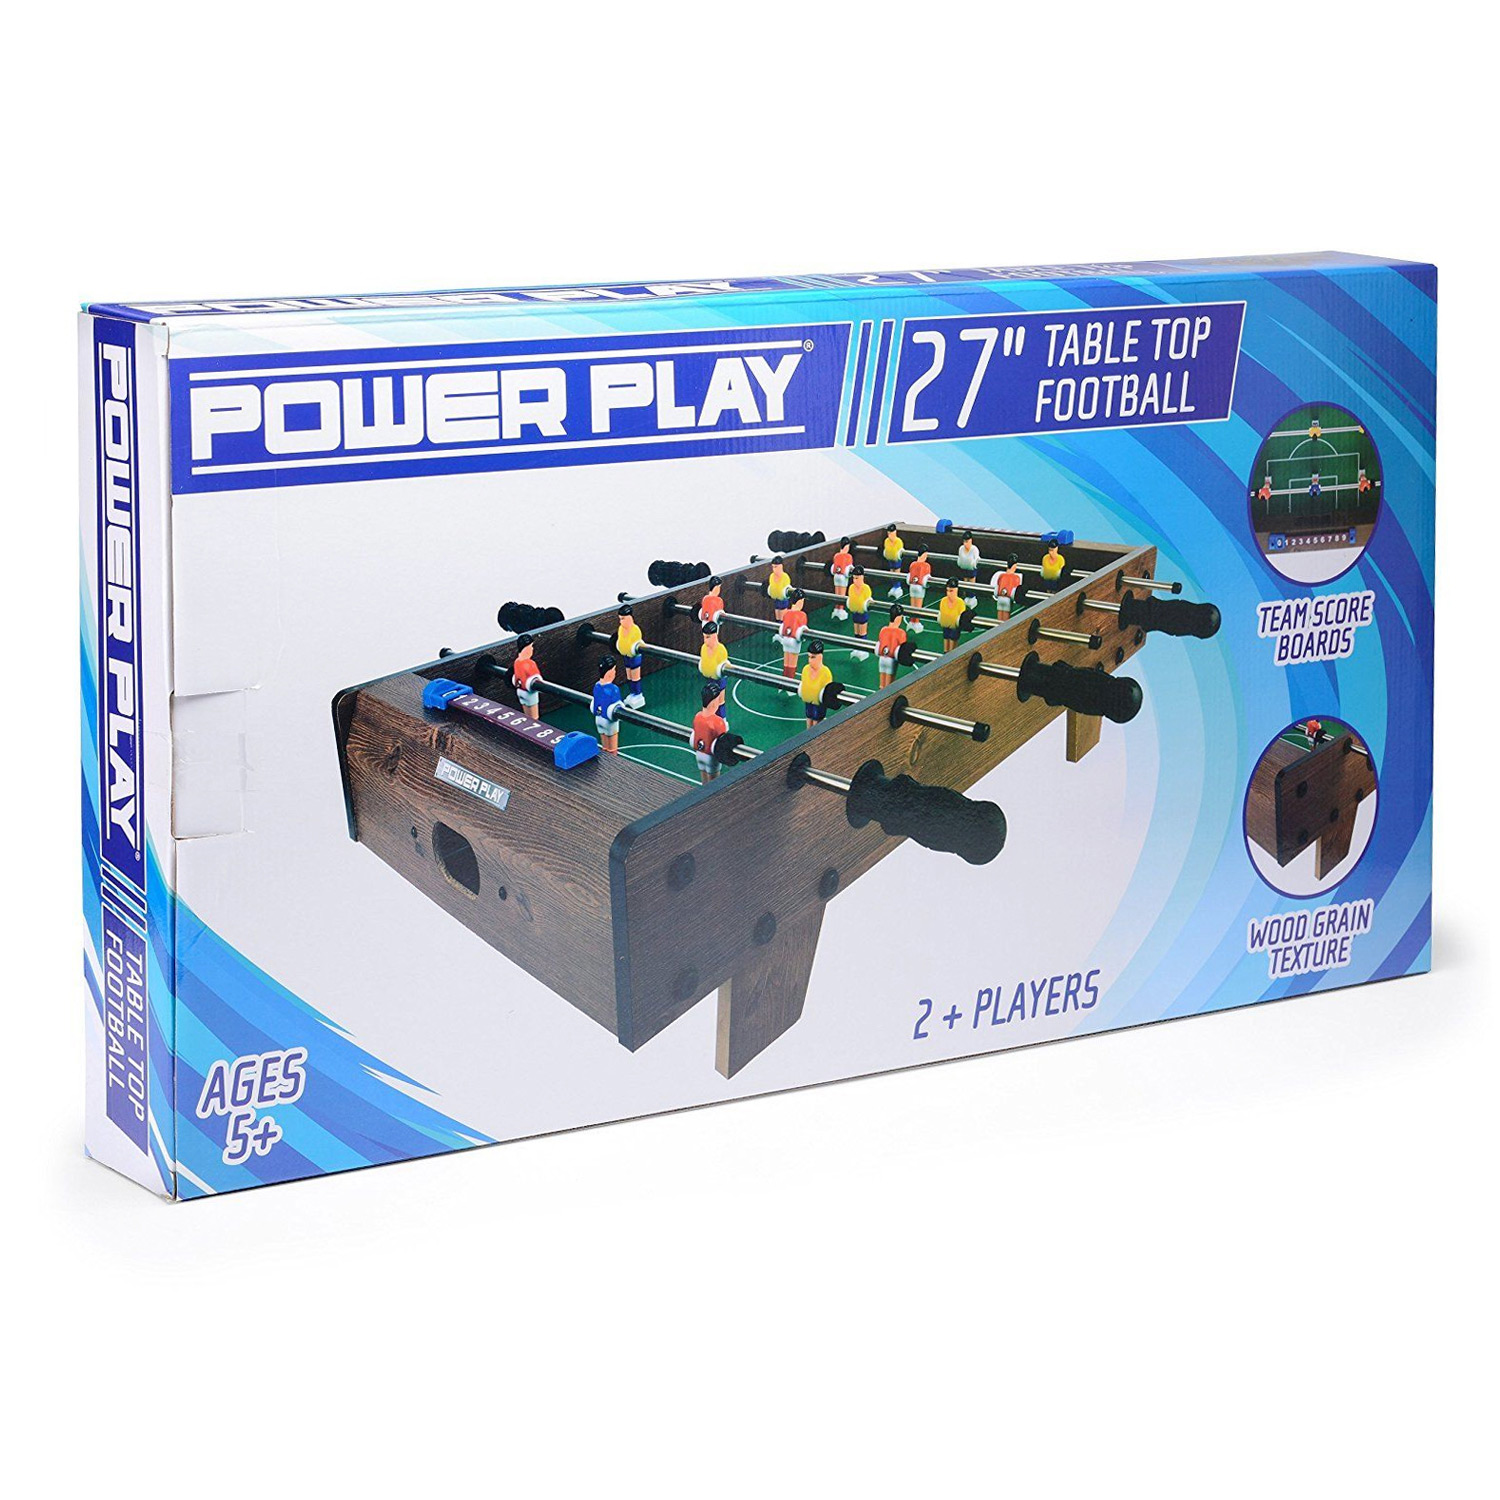 Toyrific soccer table Power Play 27